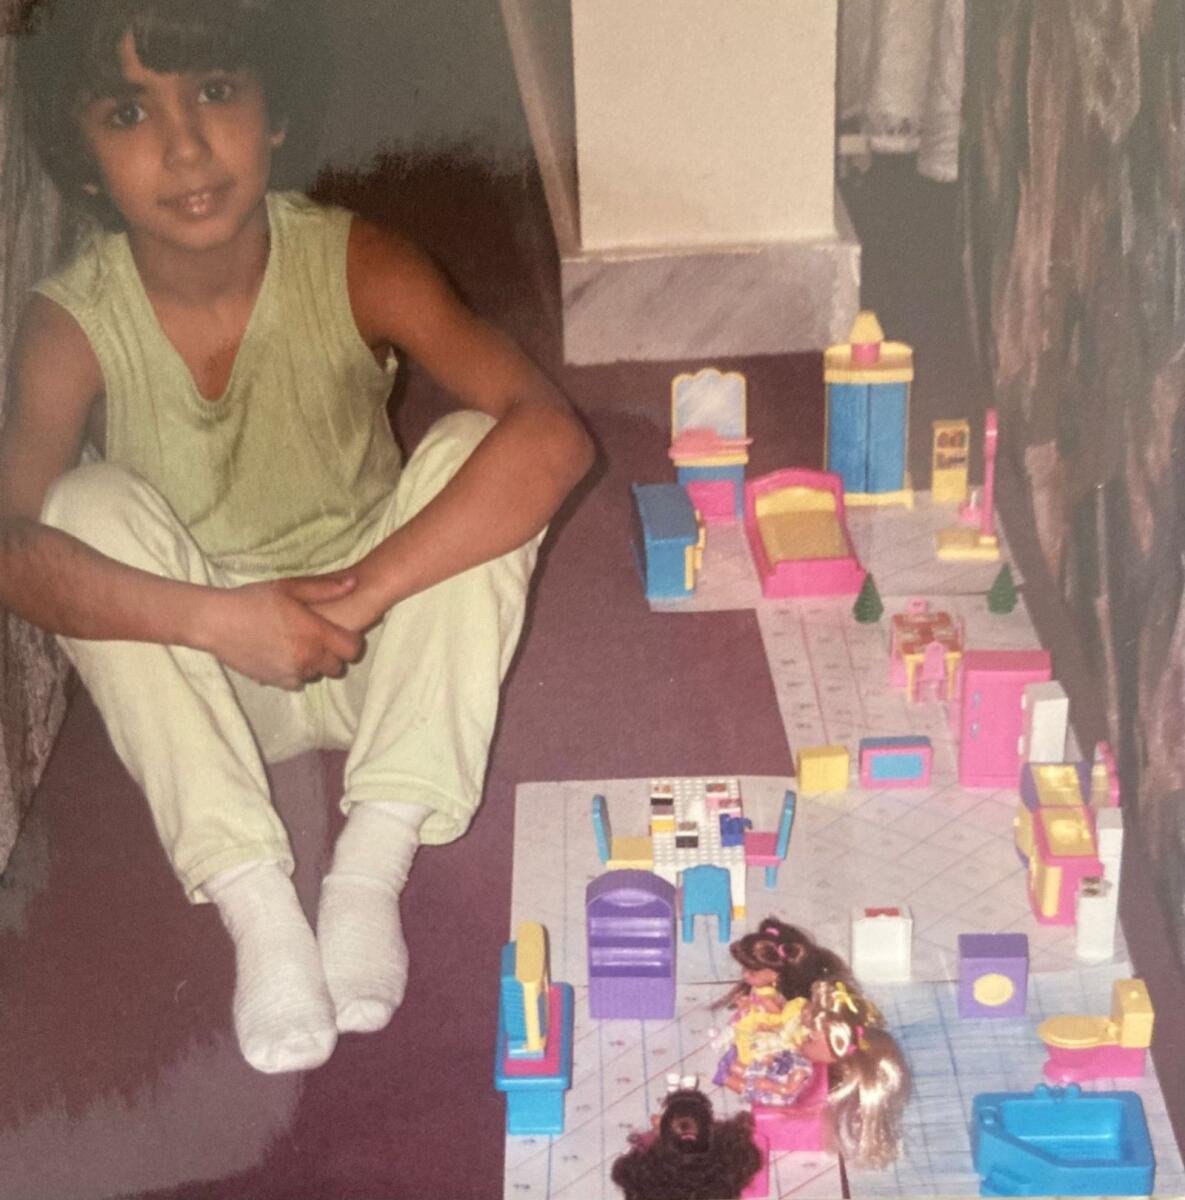 Raneem poses proudly with one of the Barbie houses she made